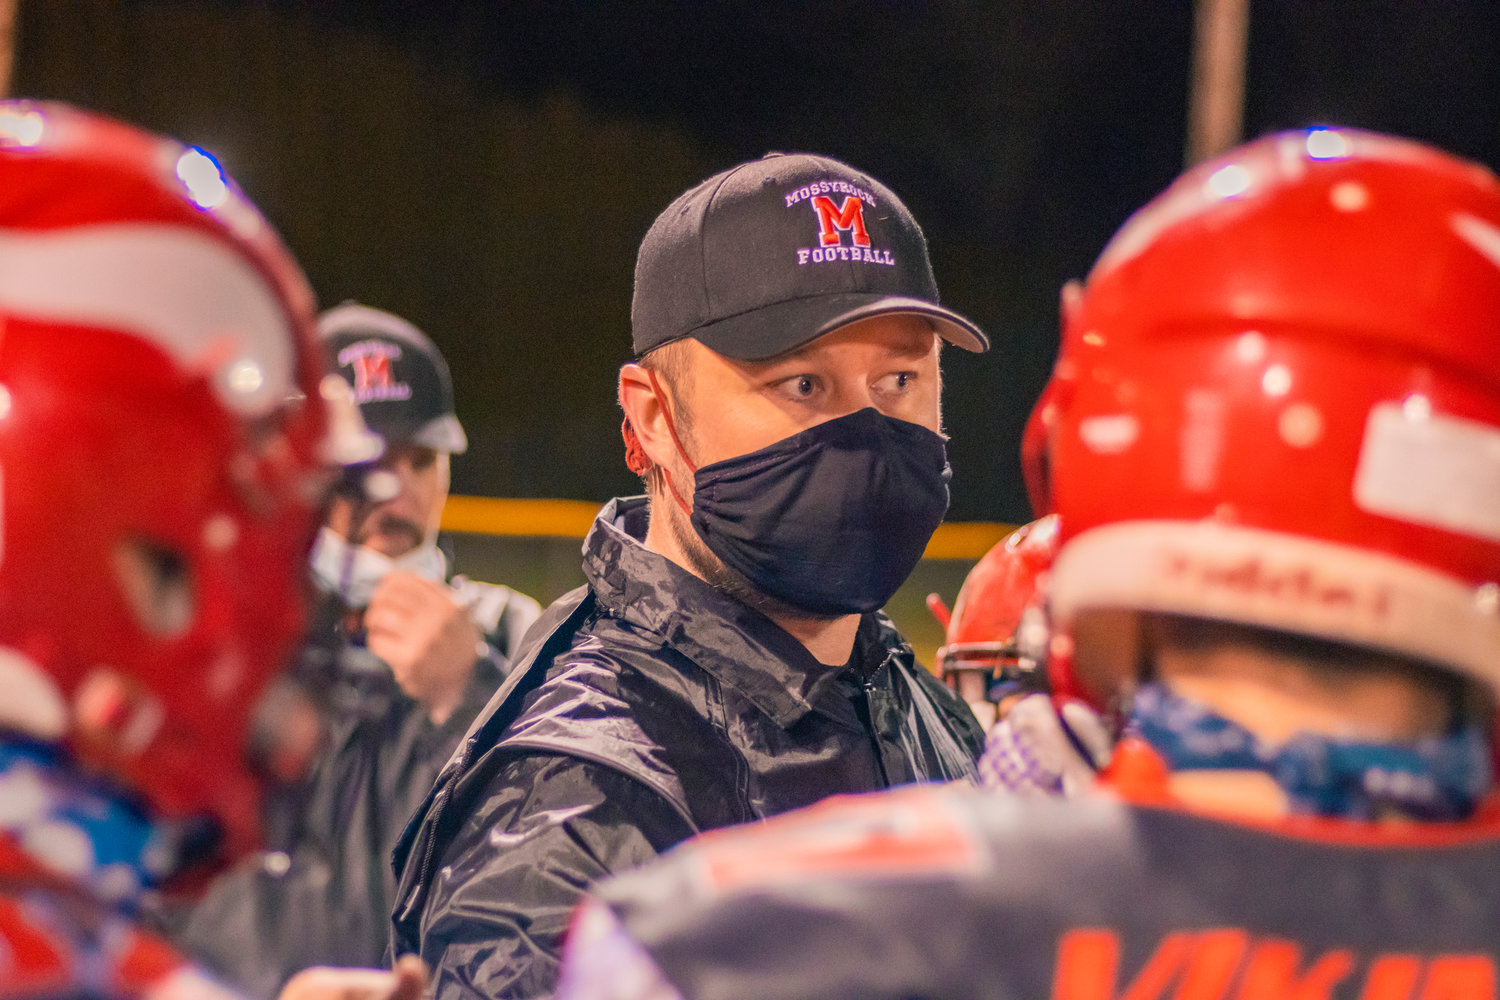 Vikings’ Head Coach Eric Ollikainen talks to players during a game against the Cardinals Friday night in Mossyrock.